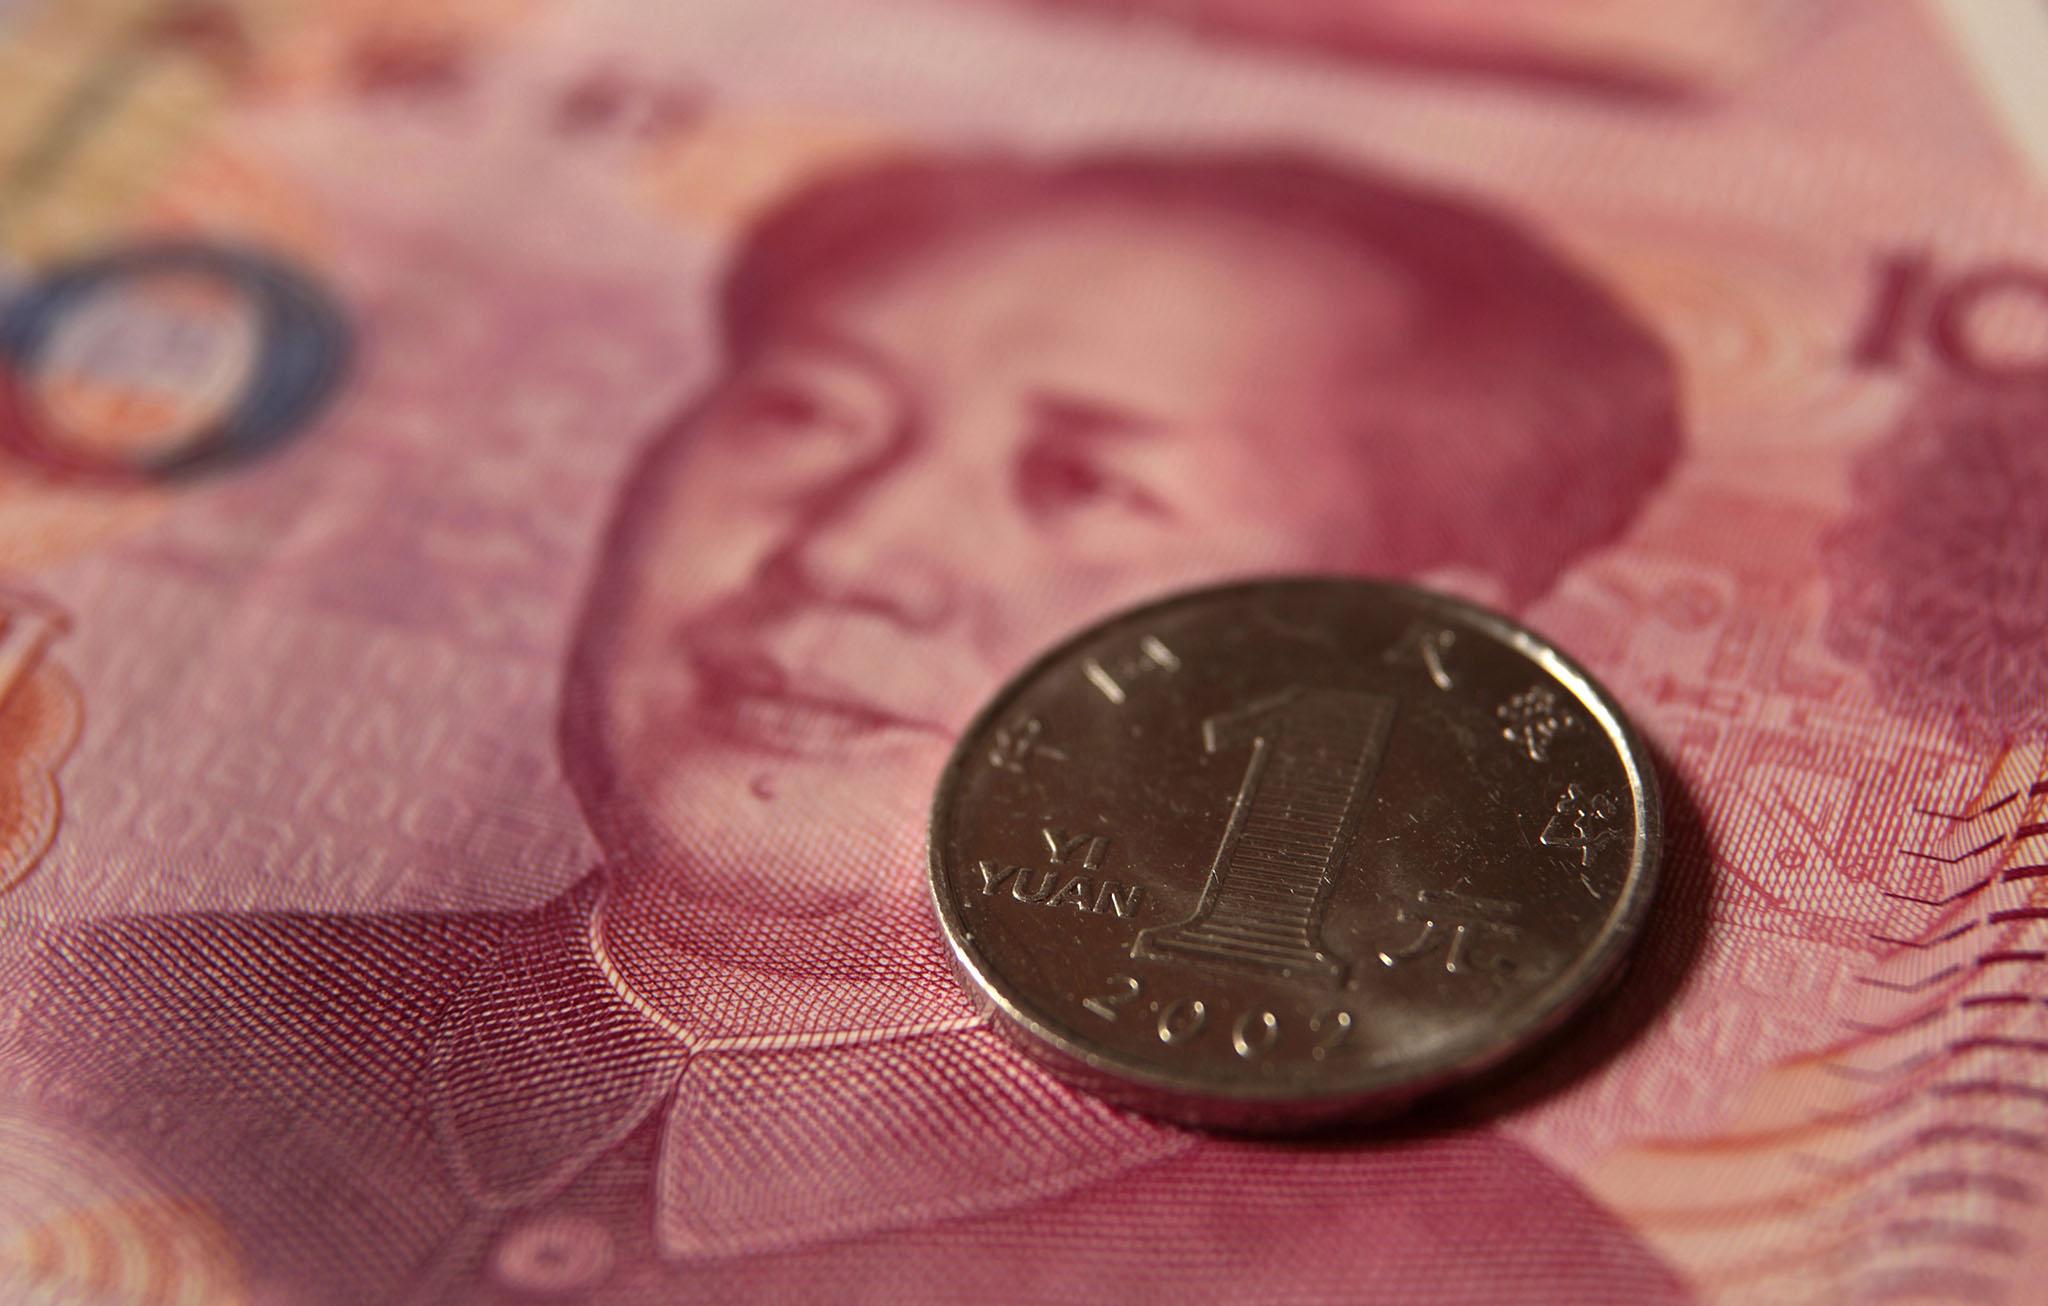 China is increasingly weaning off coins. But will it impact tourists and foreign businesses alike?